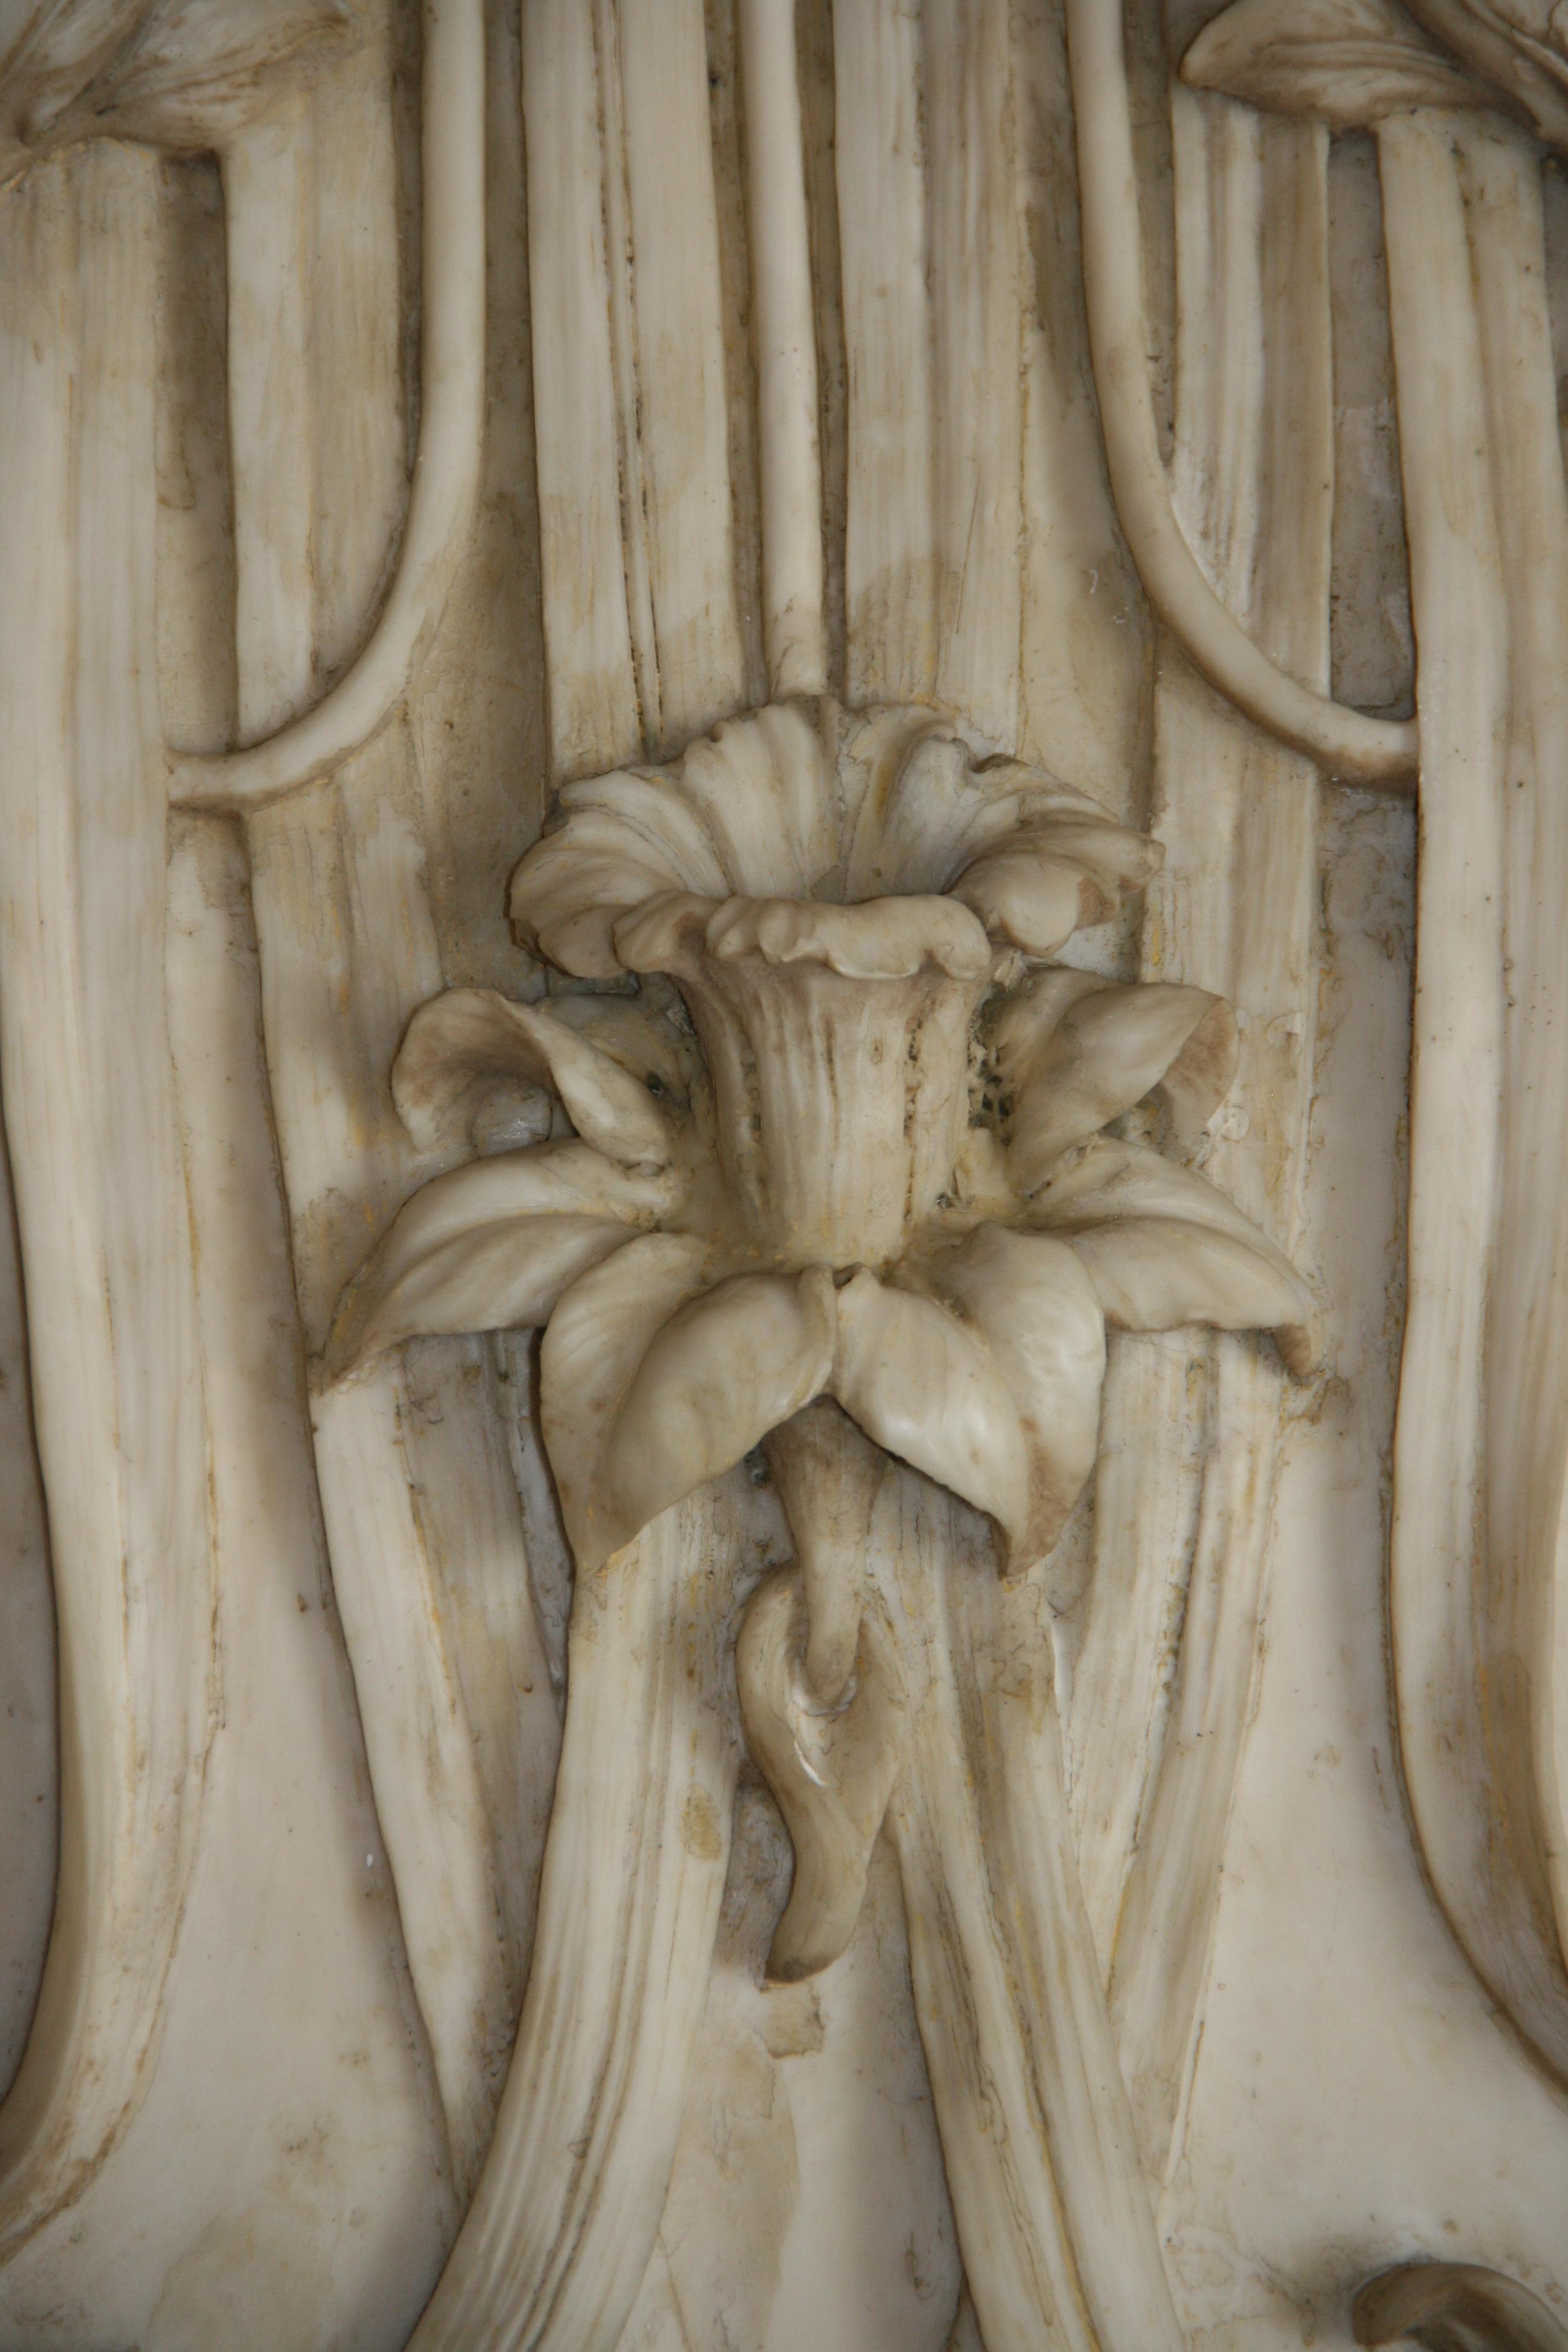 Mid-20th Century Italian Art Nouveau Style Sculptural Wall Panel For Sale